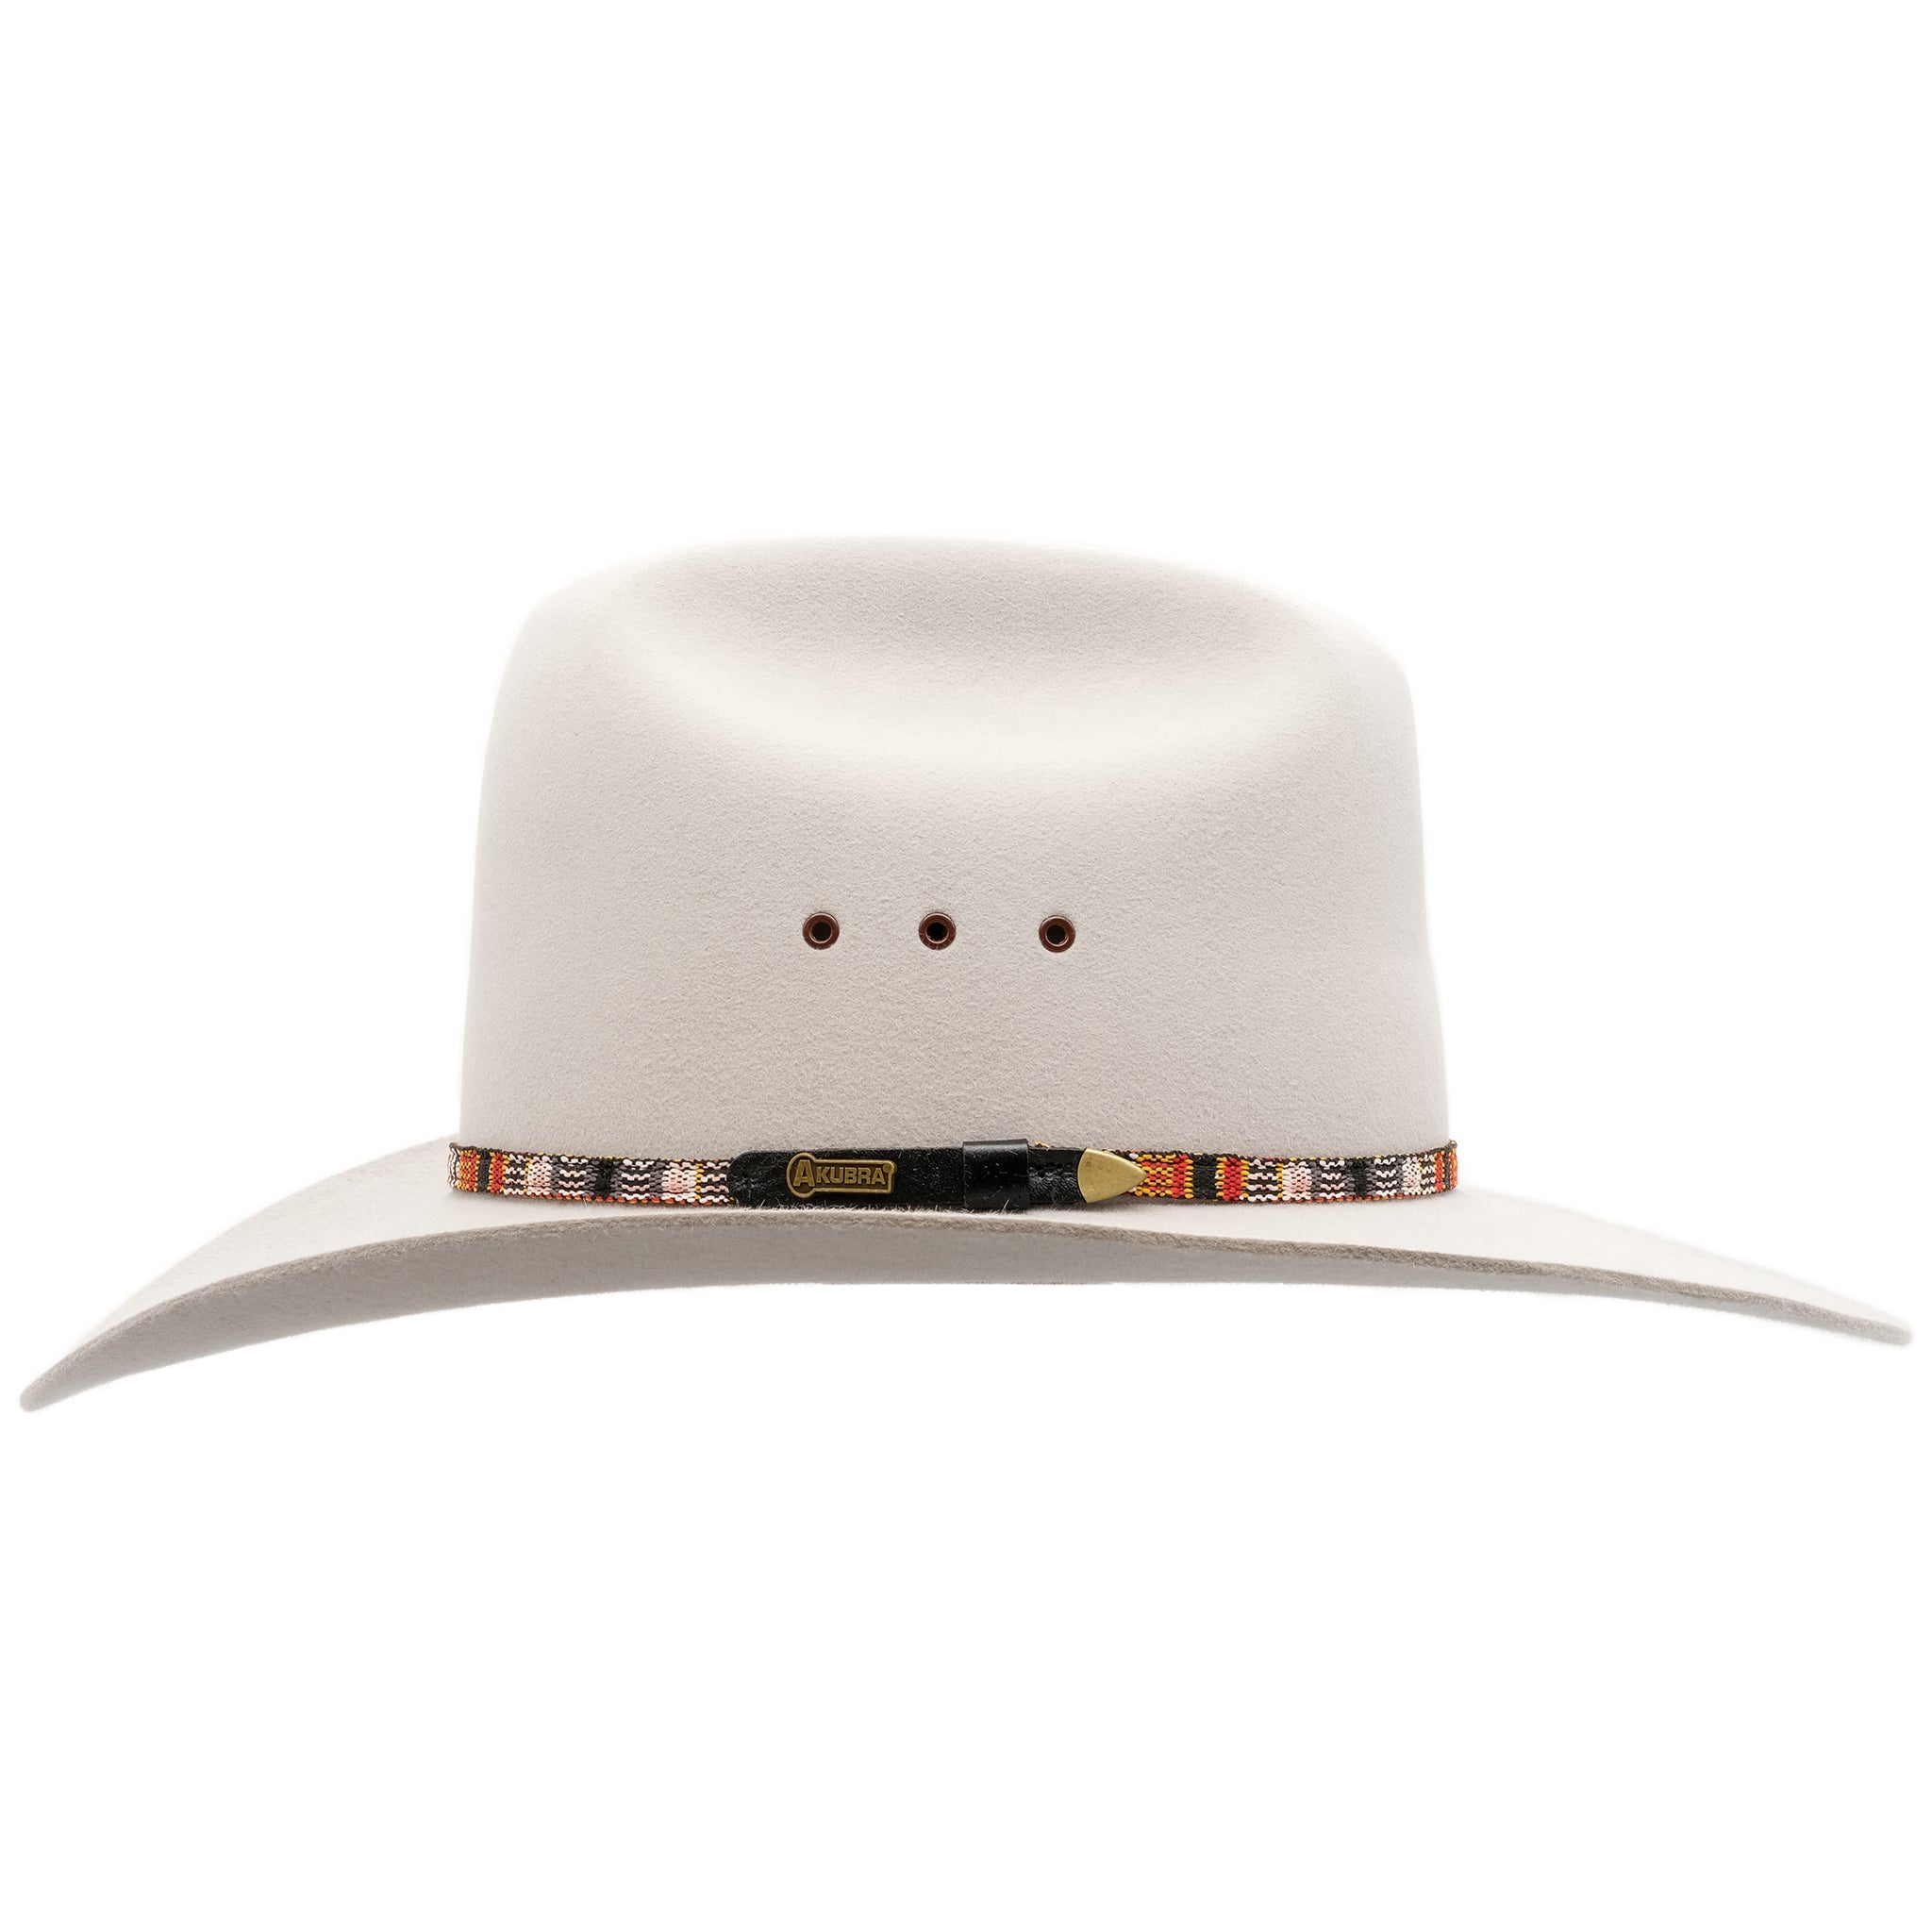 Side view of the Akubra Bronco hat in Quartz colour